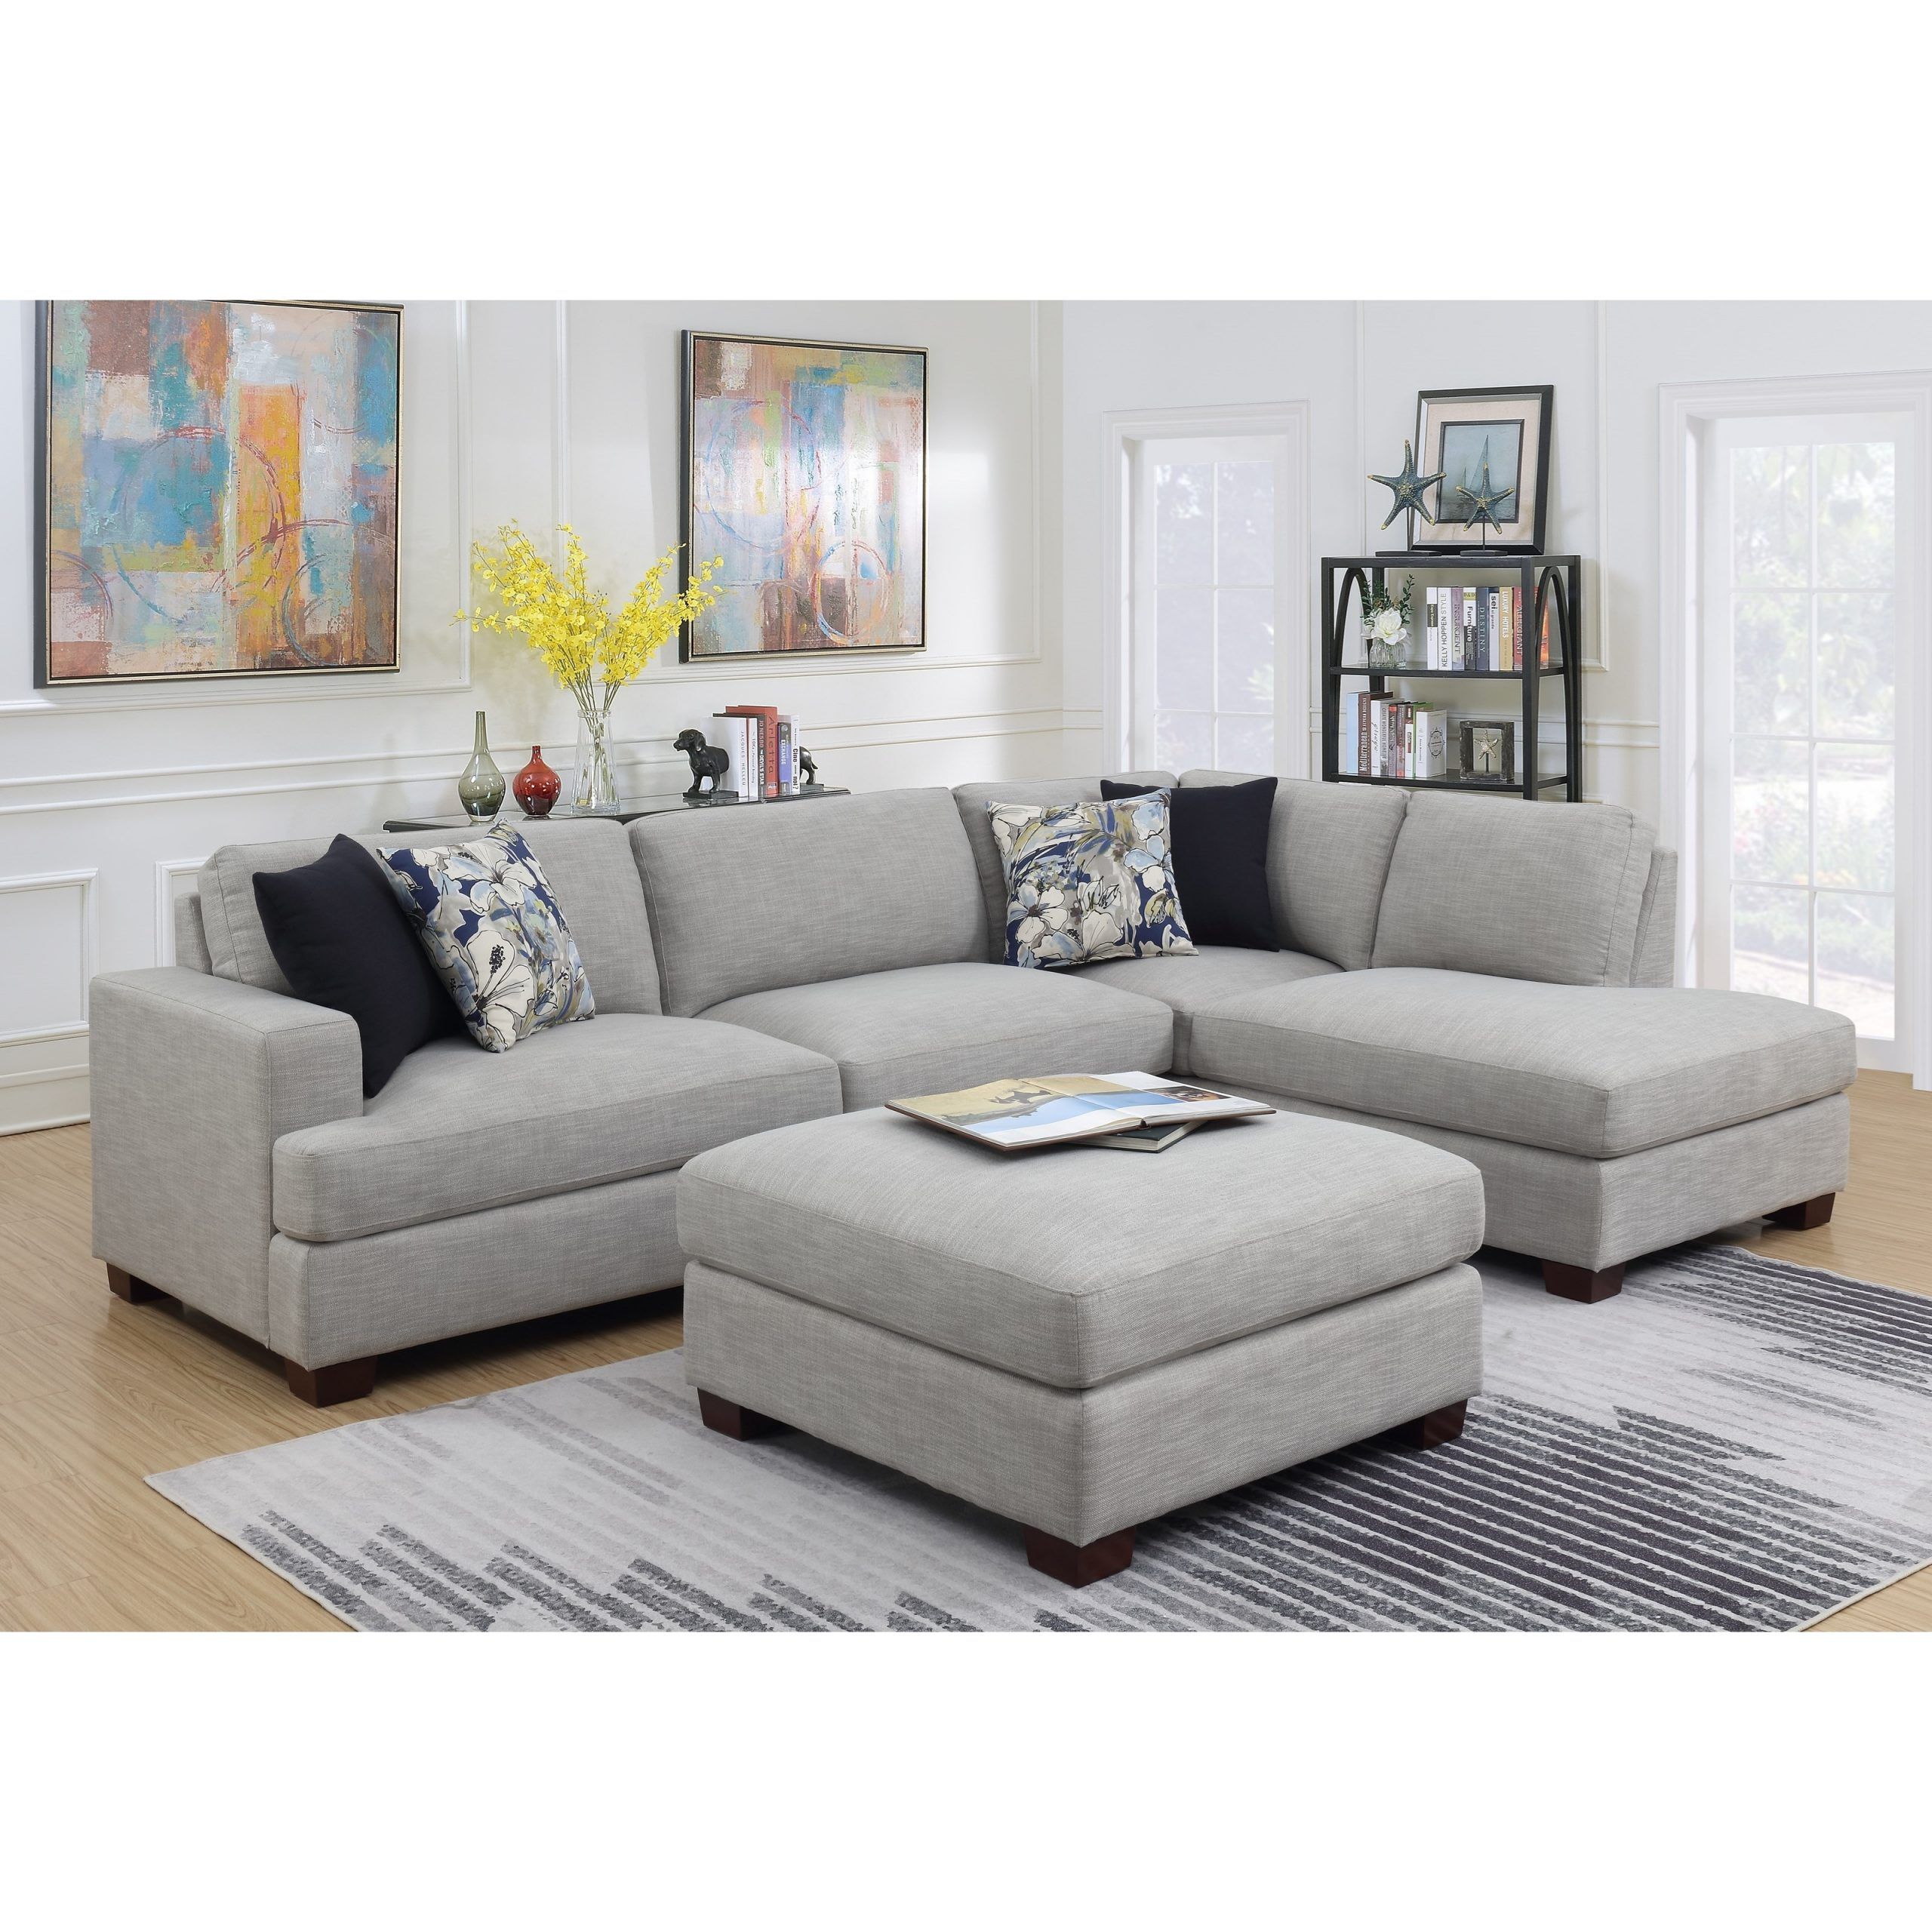 Featured Photo of 15 Best Ideas 2pc Burland Contemporary Chaise Sectional Sofas